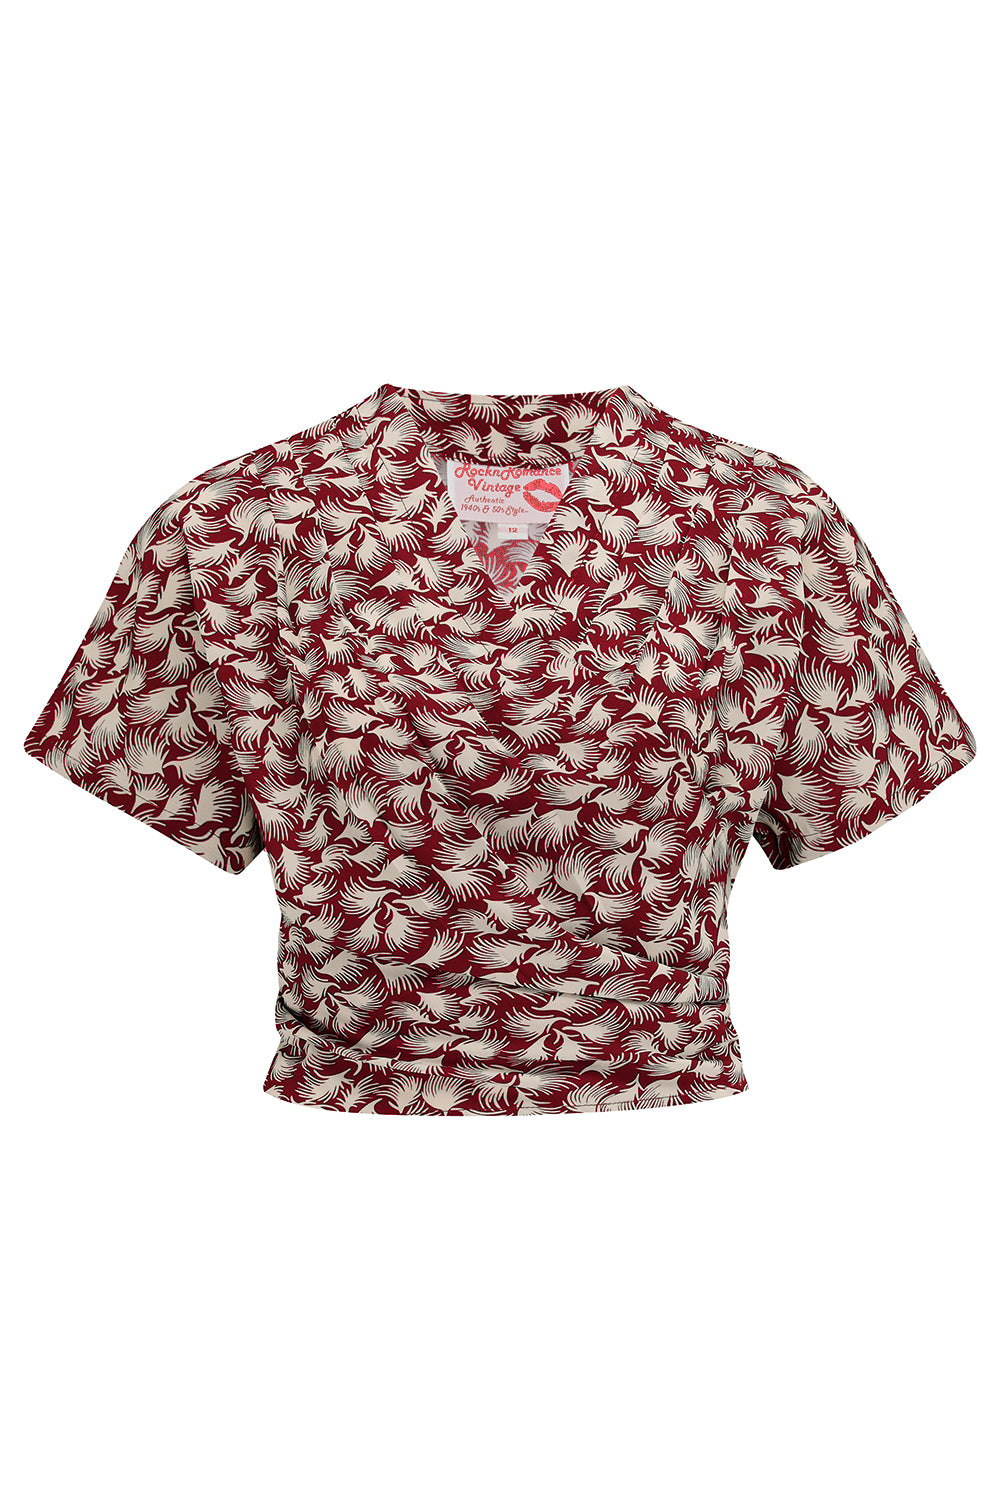 The "Darla" Short Sleeve Wrap Blouse in Wine Whisp, True & Authentic Vintage Style